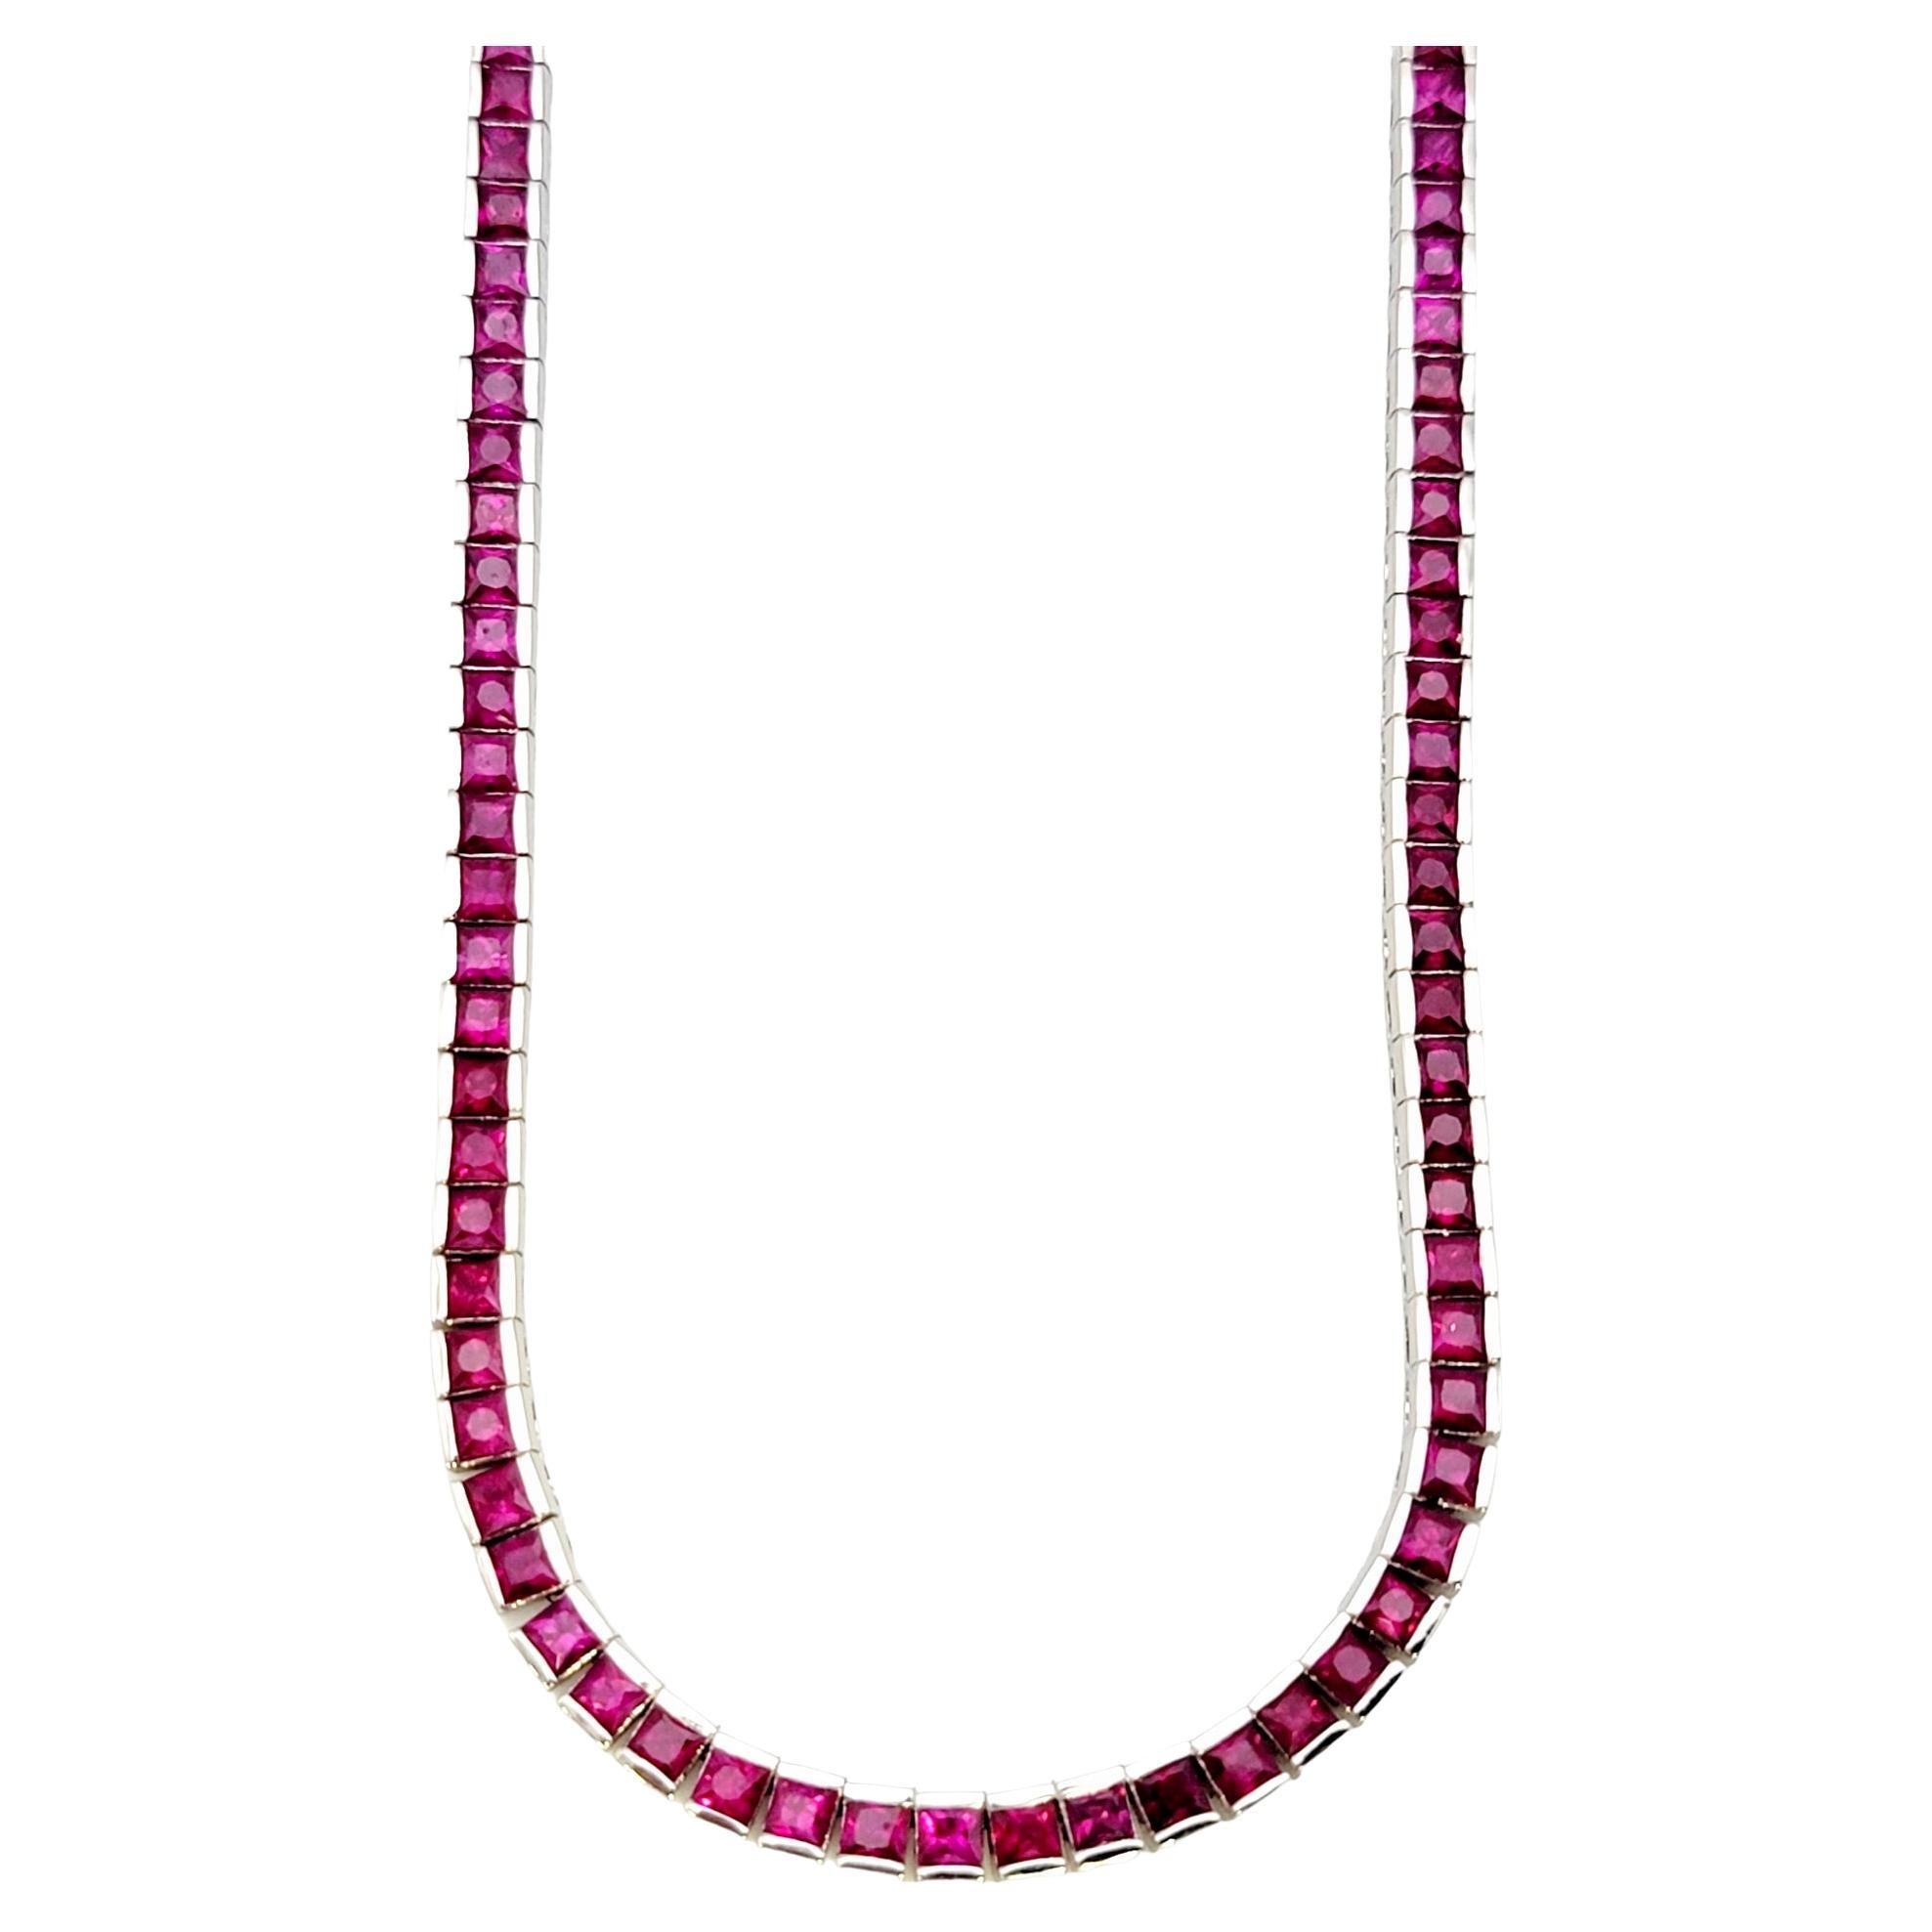 Absolutely stunning contemporary single strand ruby necklace in lustrous white gold. Designed to mesmerize and inspire, this simple yet refined necklace offers bold color, timeless elegance and impeccable craftsmanship.

The focal point of this